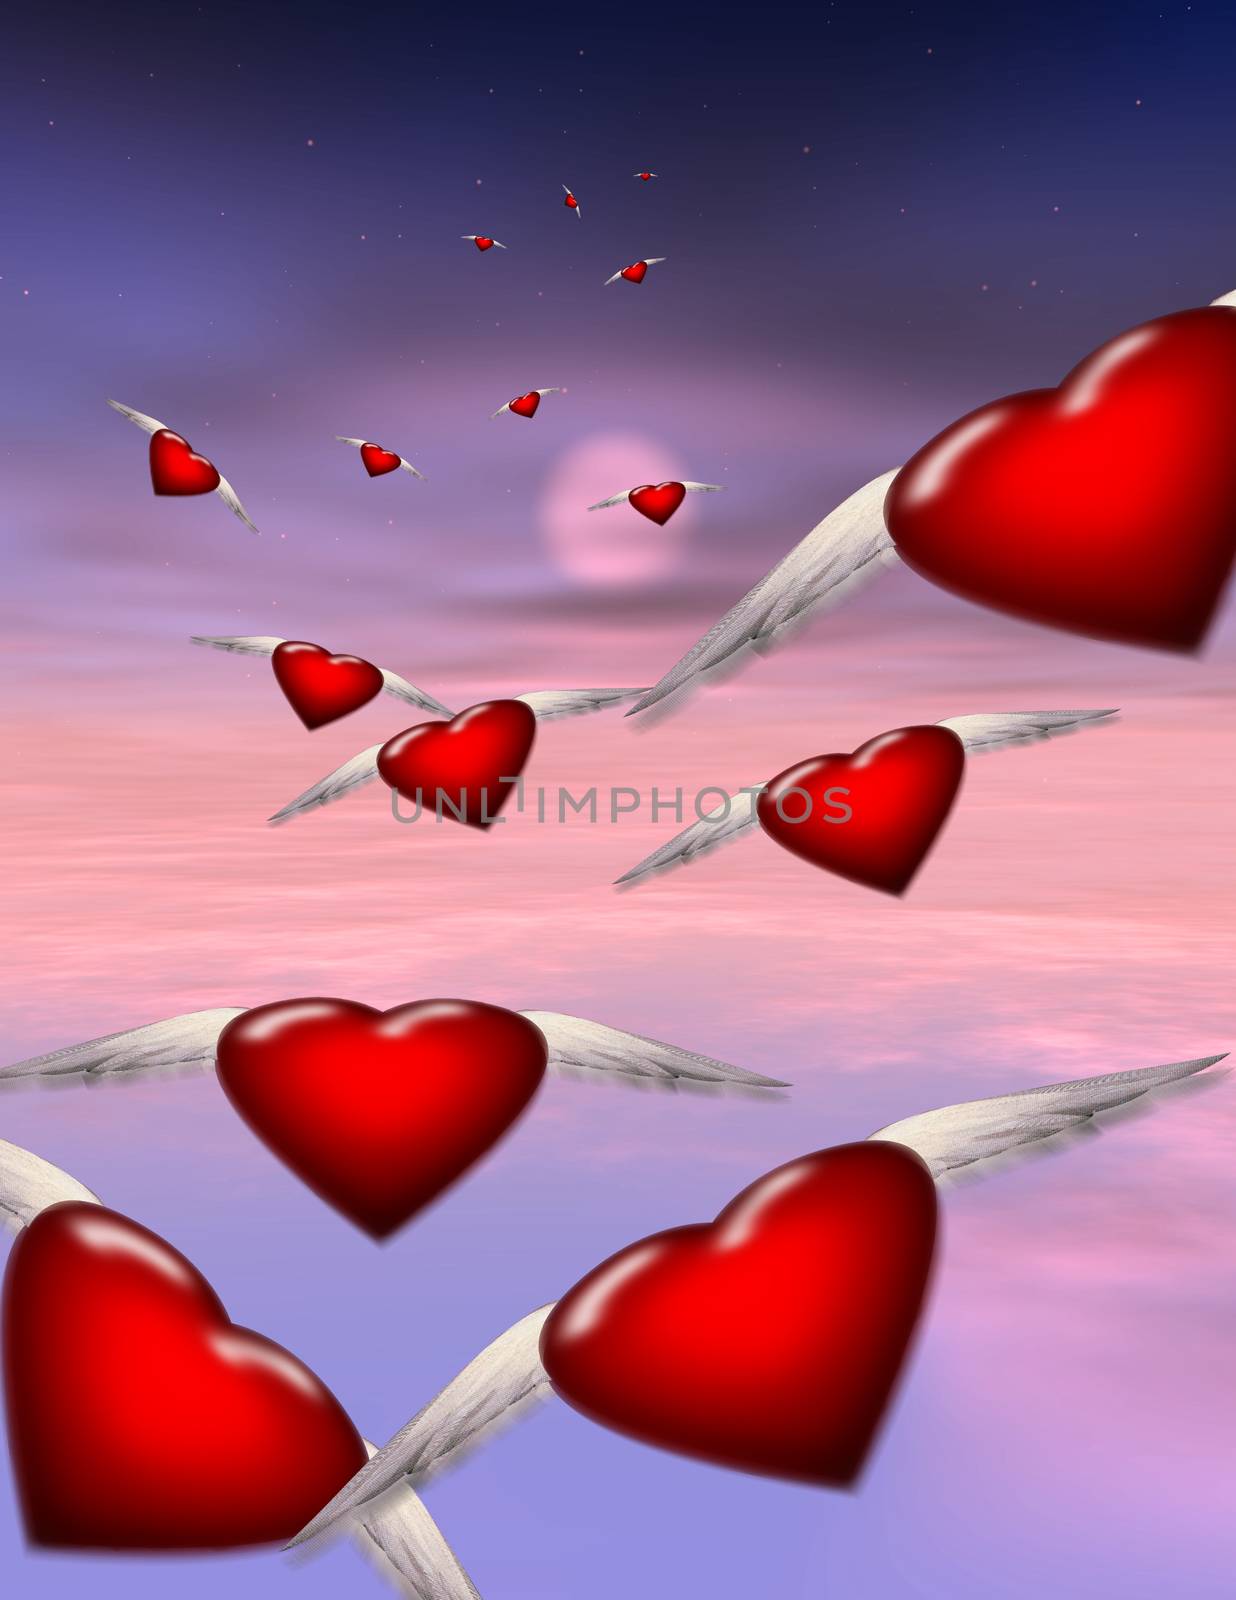 Winged hearts by applesstock